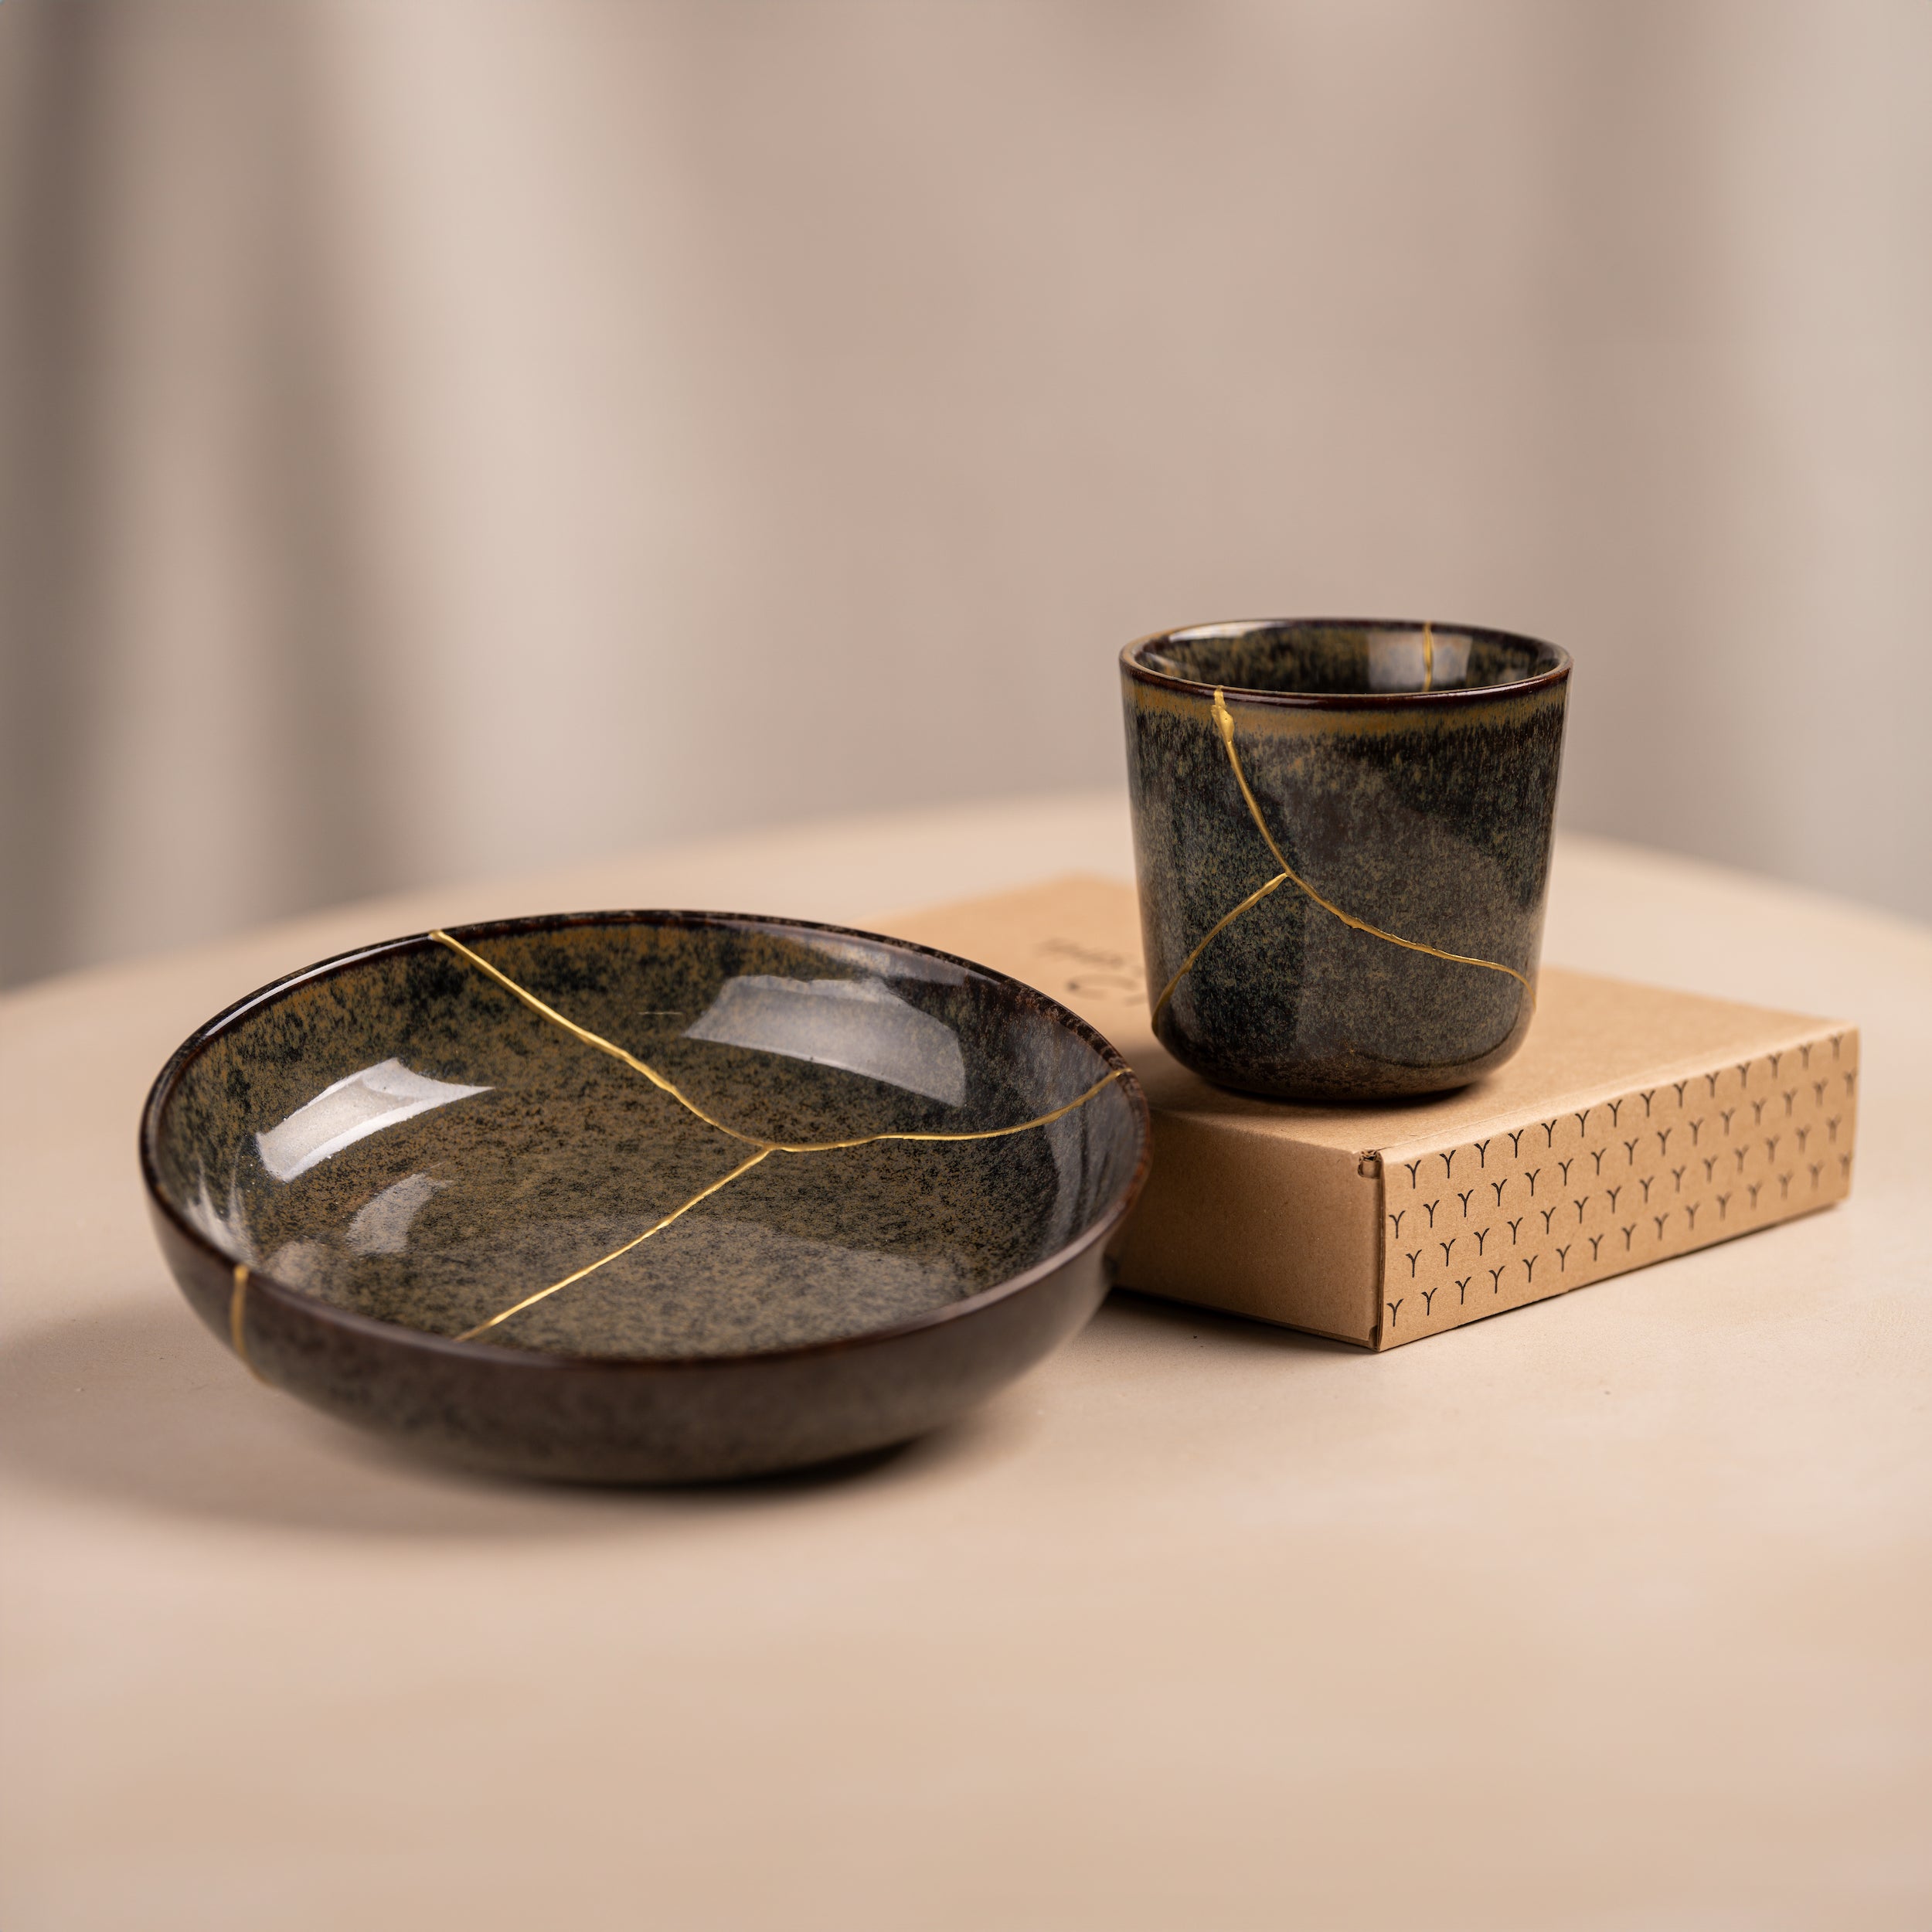 Kintsugi Kit for Starters, with Gold or Silver.